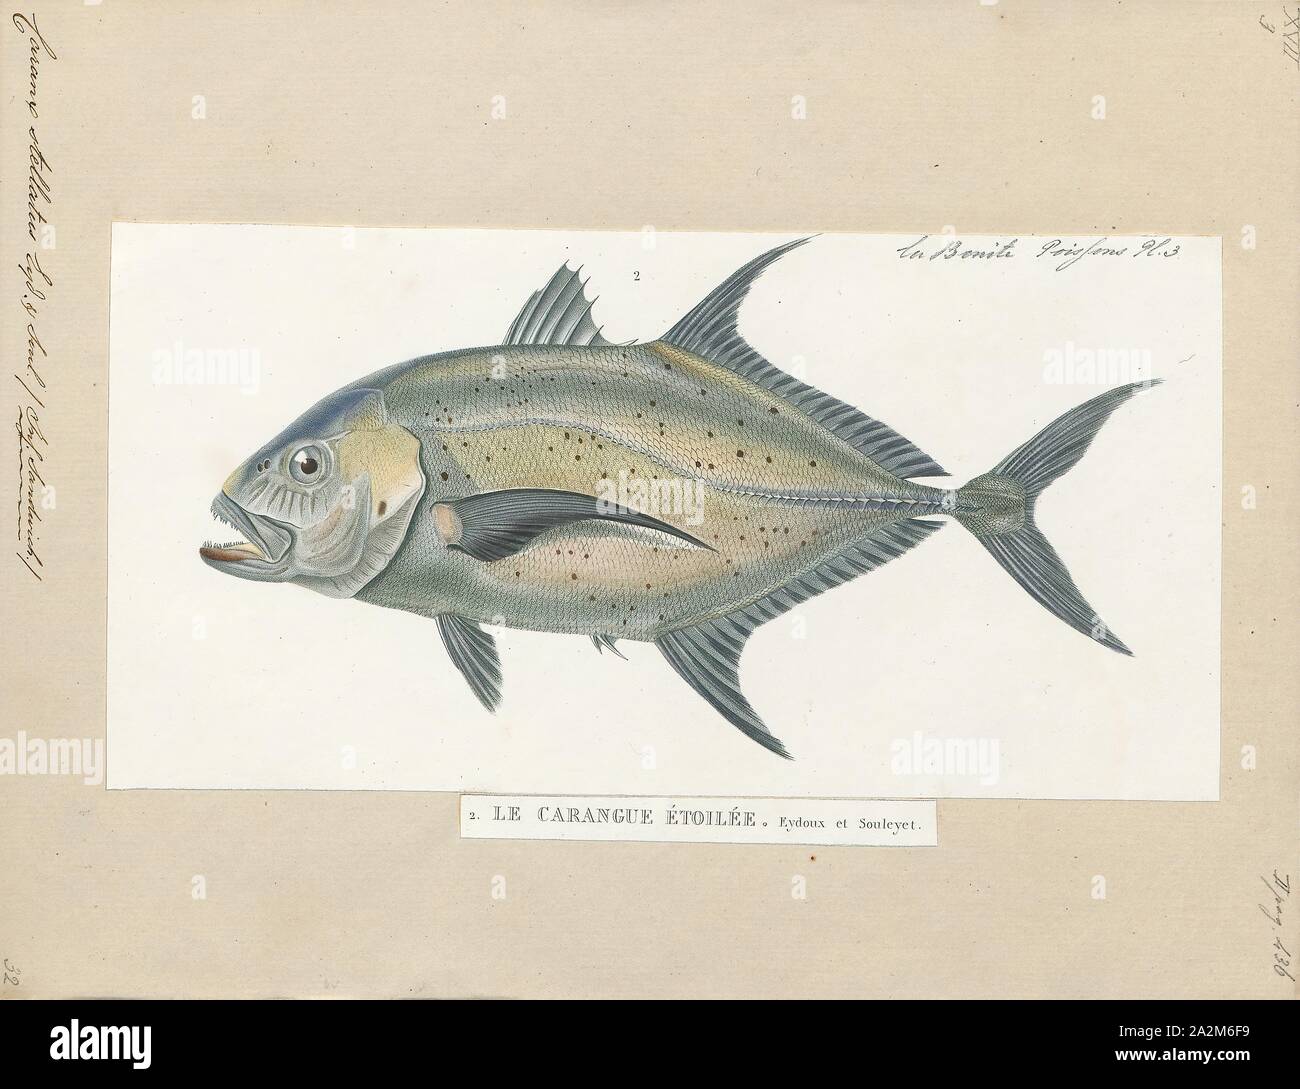 Caranx stellatus, Print, The bluefin trevally, Caranx melampygus (also known as the bluefin jack, bluefin kingfish, bluefinned crevalle, blue ulua, omilu and spotted trevally), is a species of large, widely distributed marine fish classified in the jack family, Carangidae. The bluefin trevally is distributed throughout the tropical waters of the Indian and Pacific Oceans, ranging from Eastern Africa in the west to Central America in the east, including Japan in the north and Australia in the south. The species grows to a maximum known length of 117 cm and a weight of 43.5 kg, however is rare Stock Photo